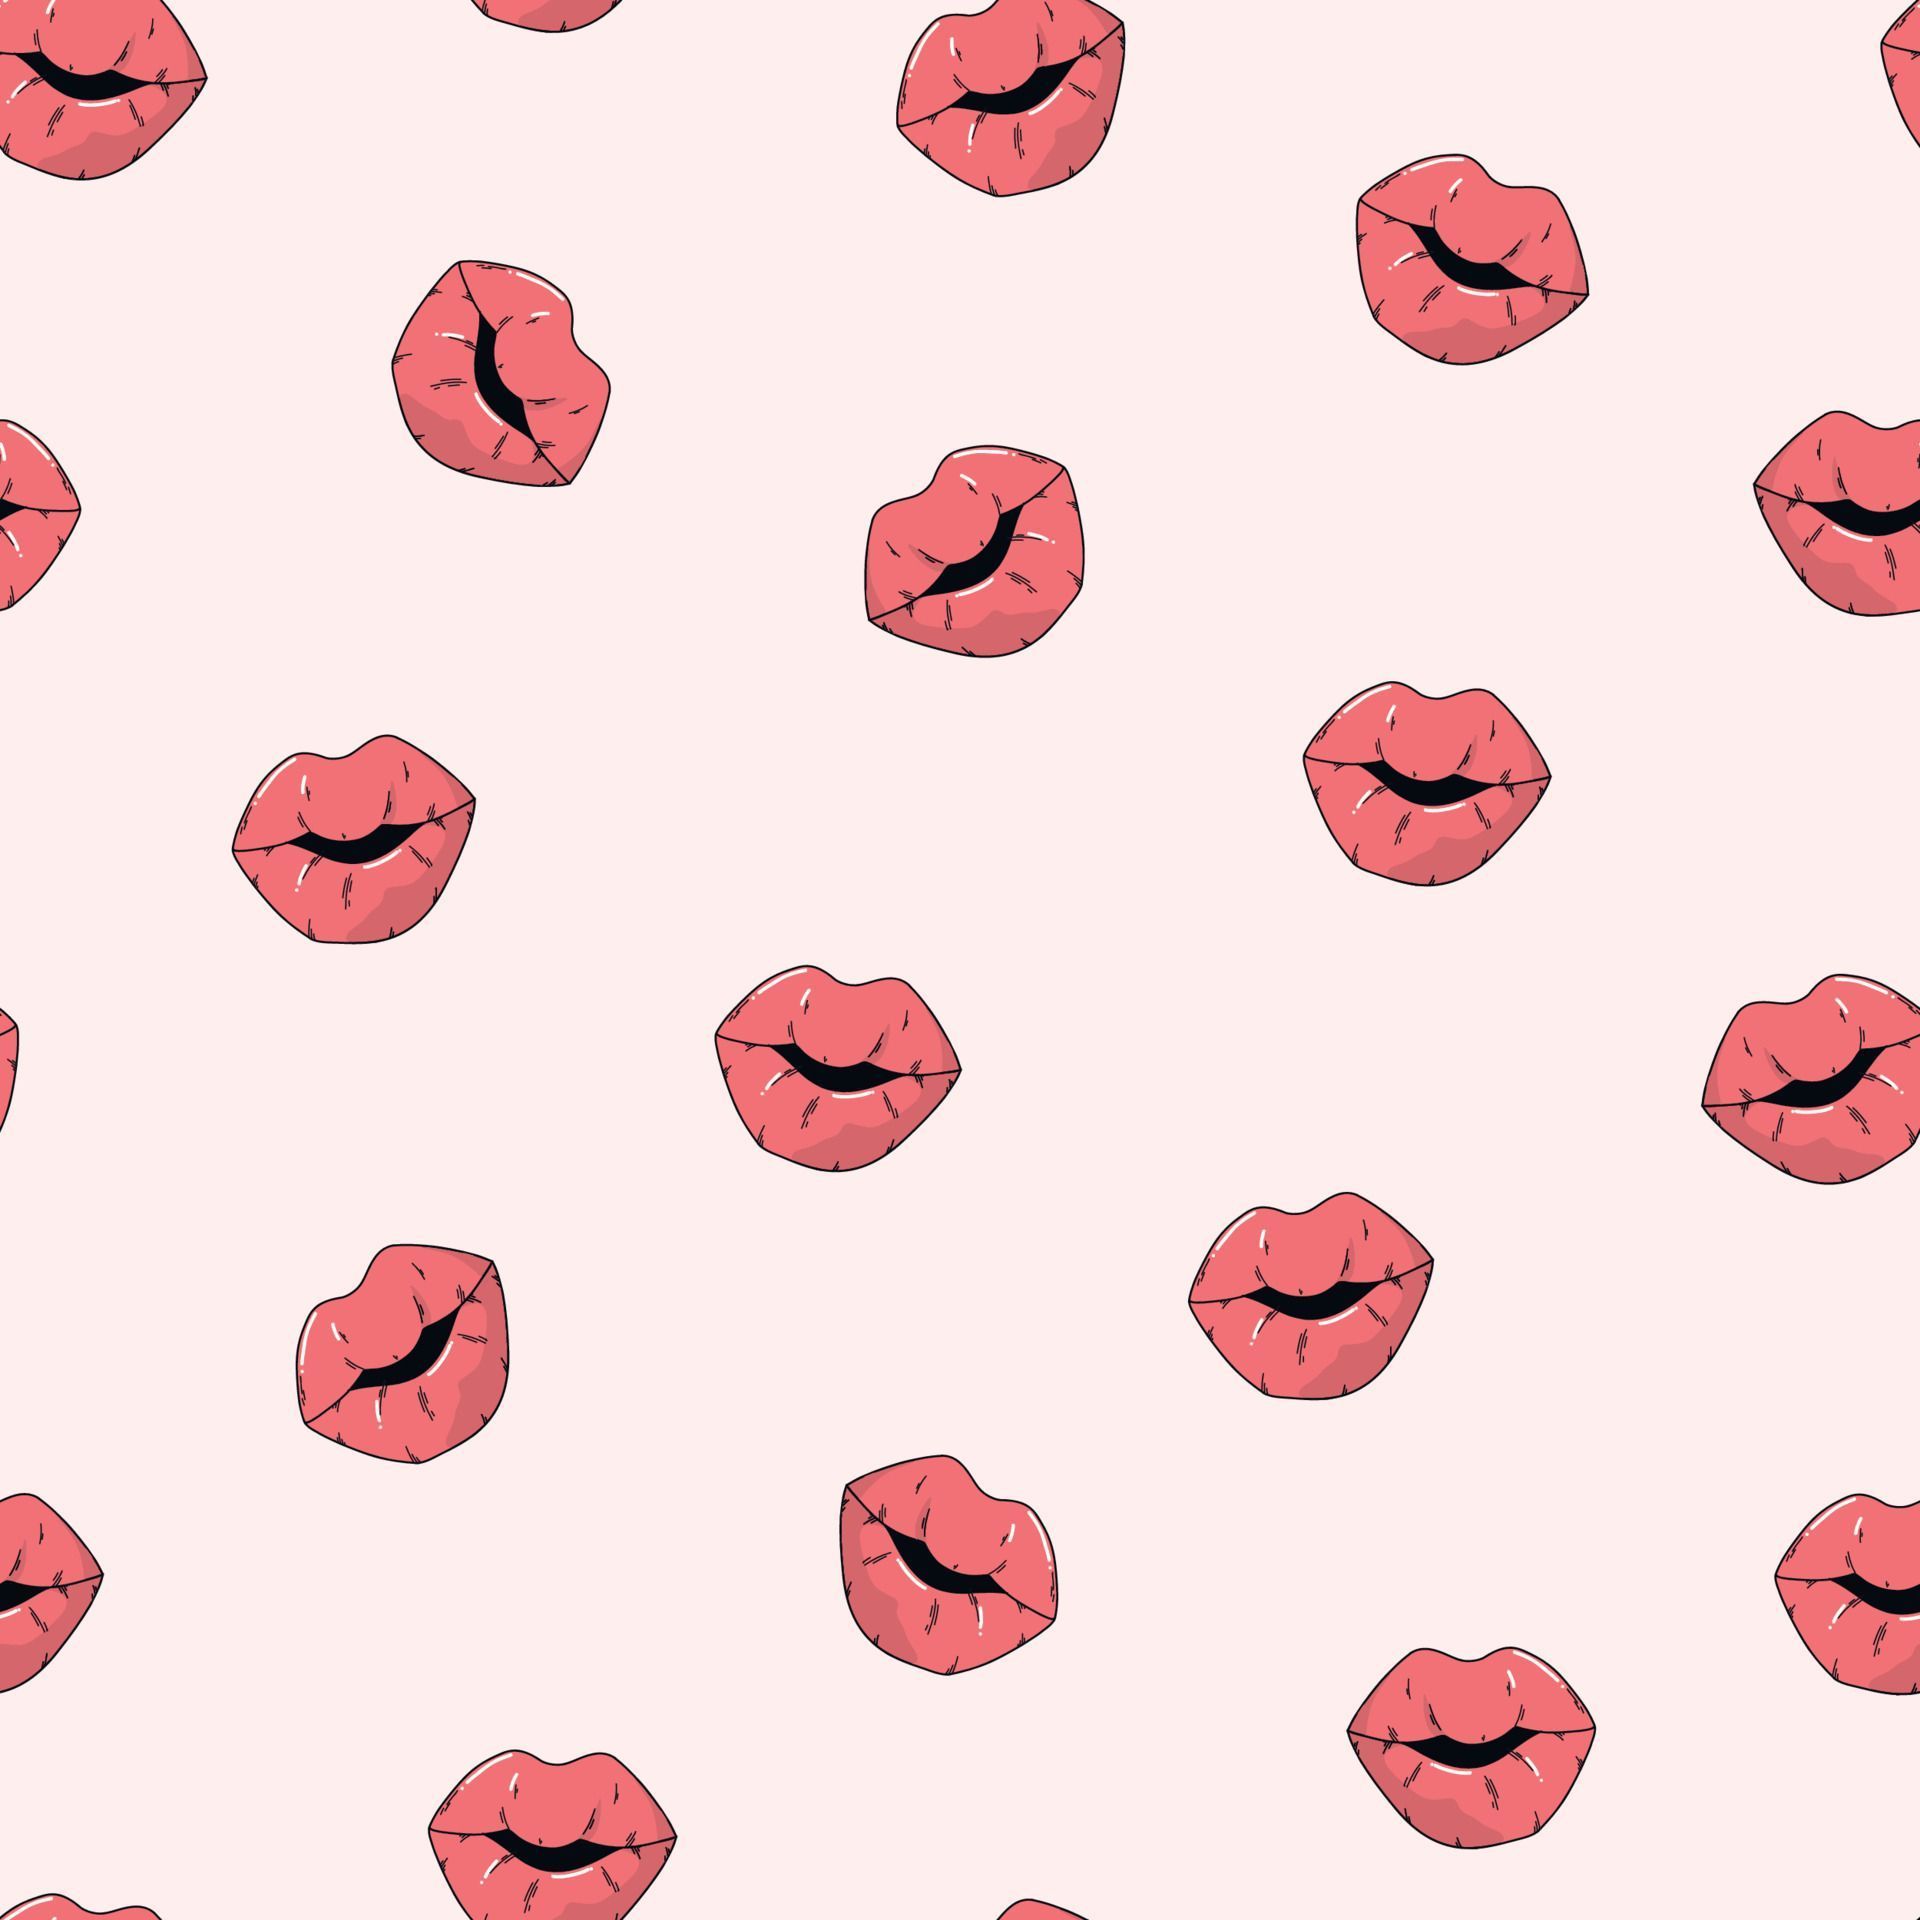 A pattern of red lips on pink background - Lips